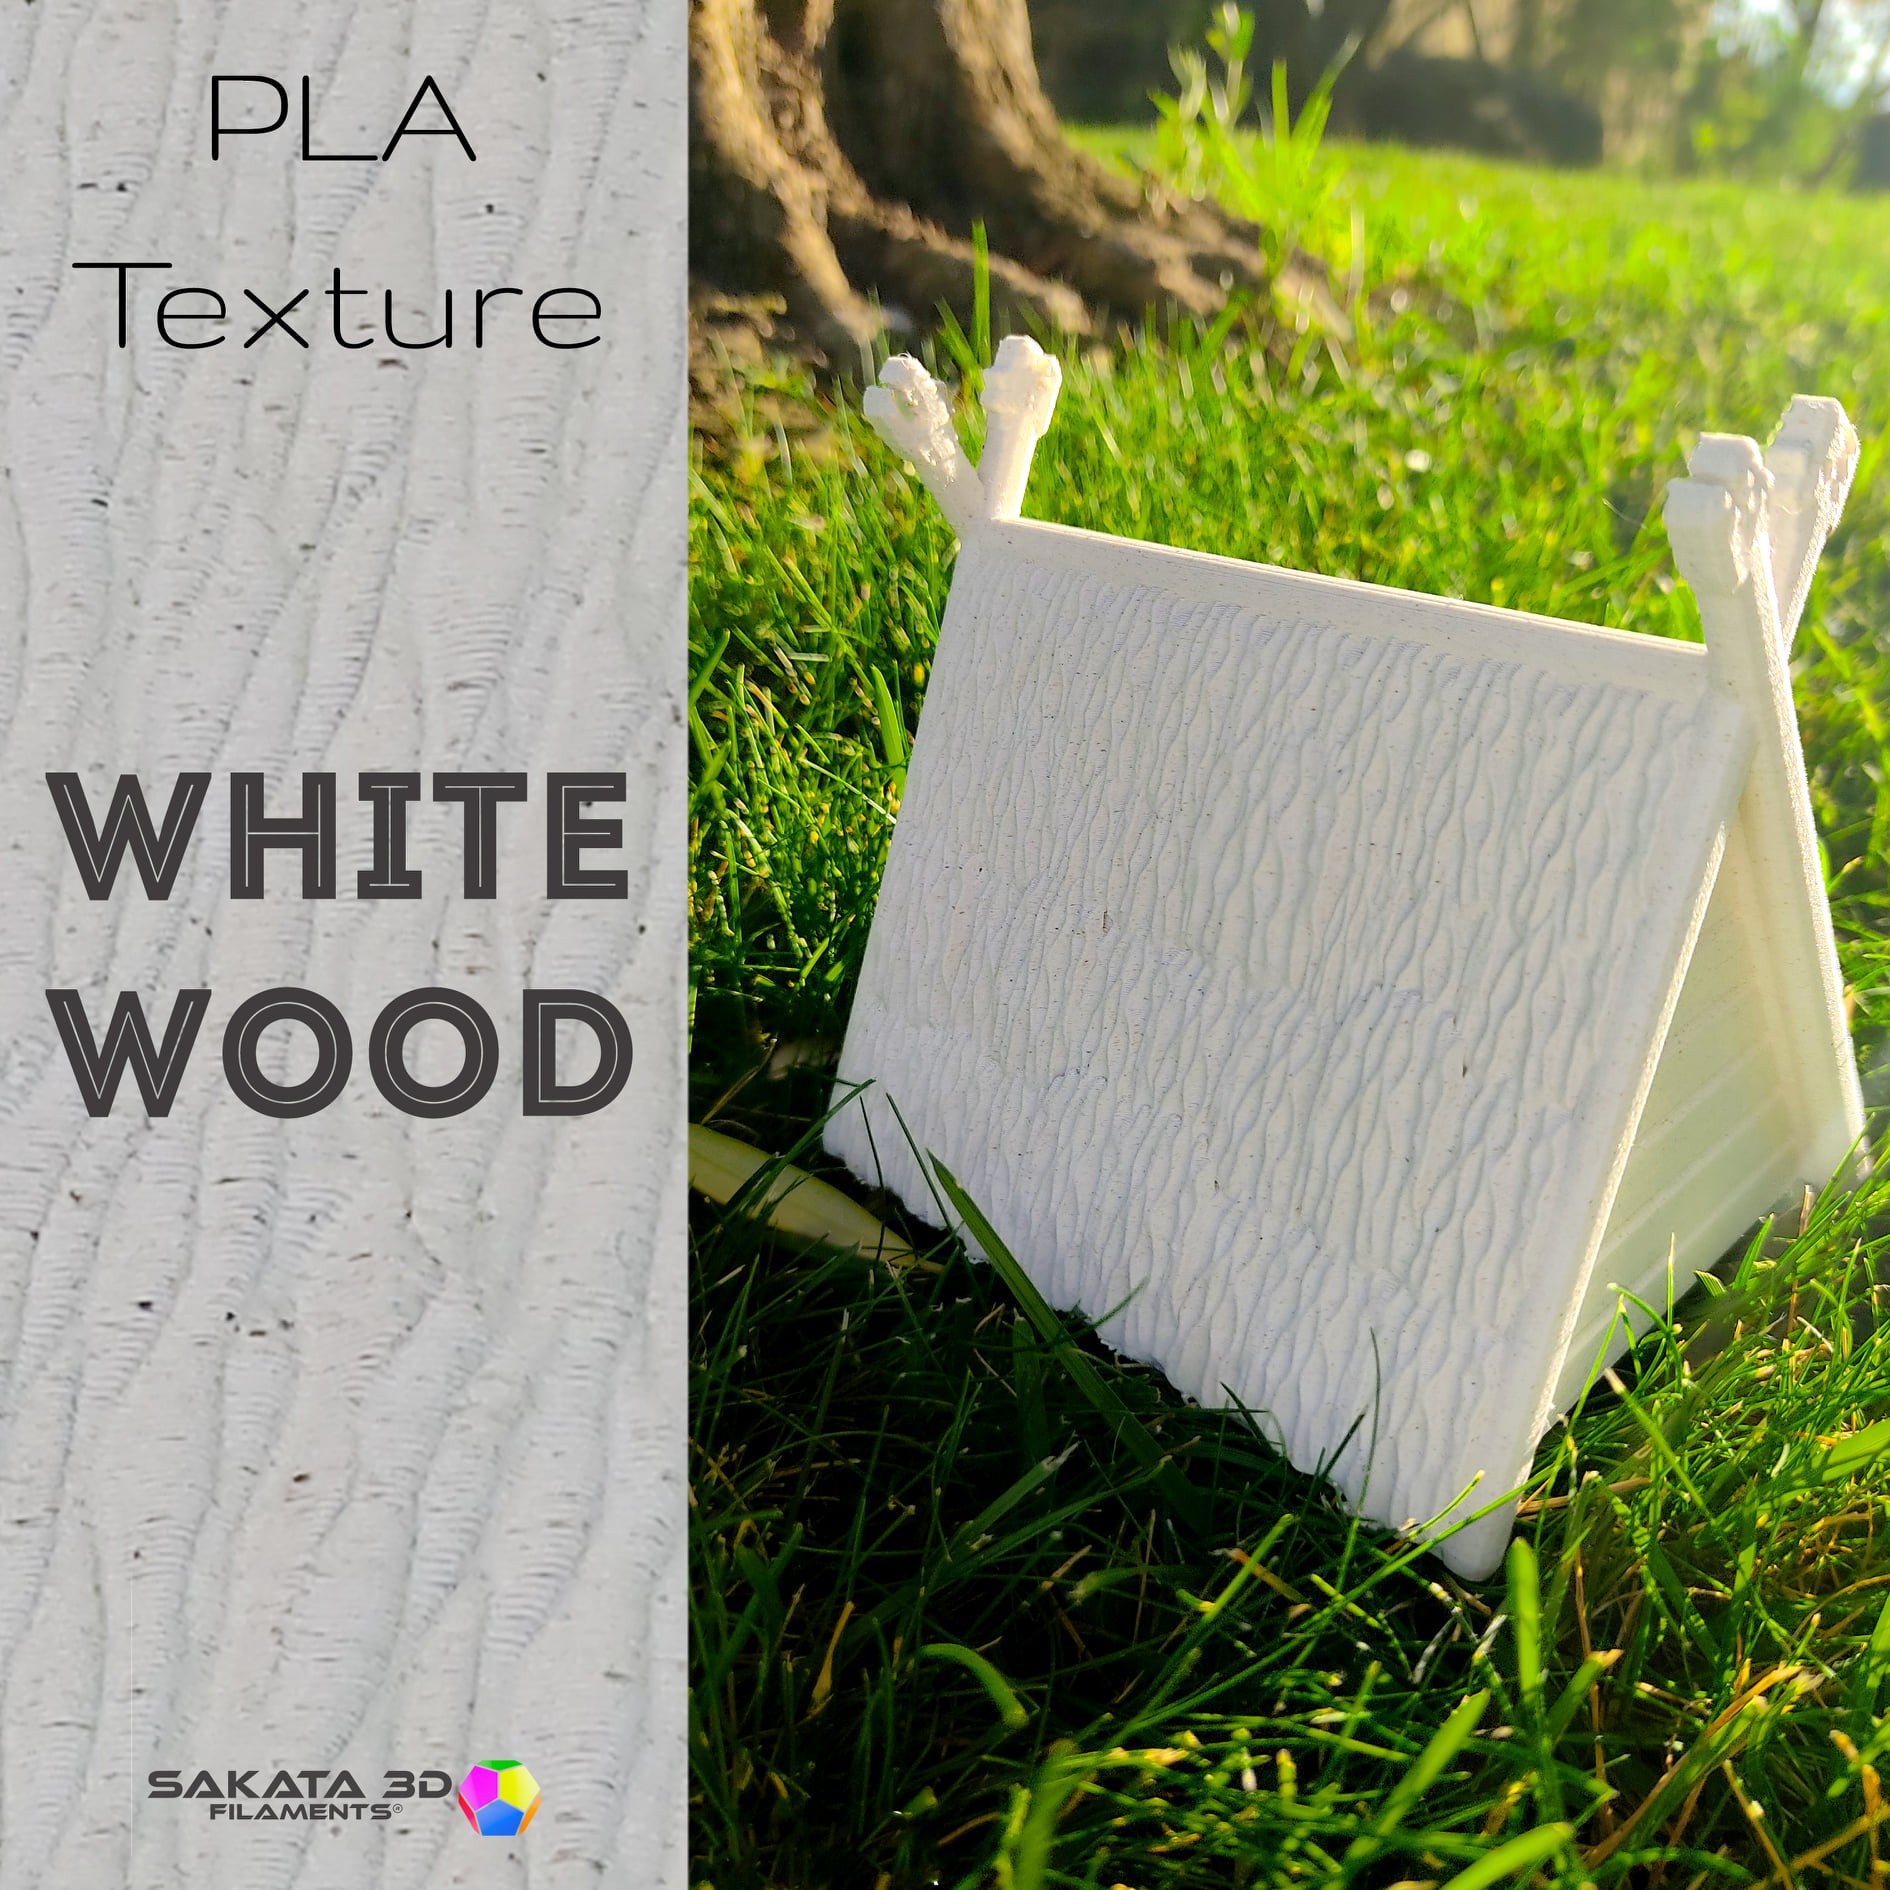  New member of the PLA Texture family: WHITE WOOD